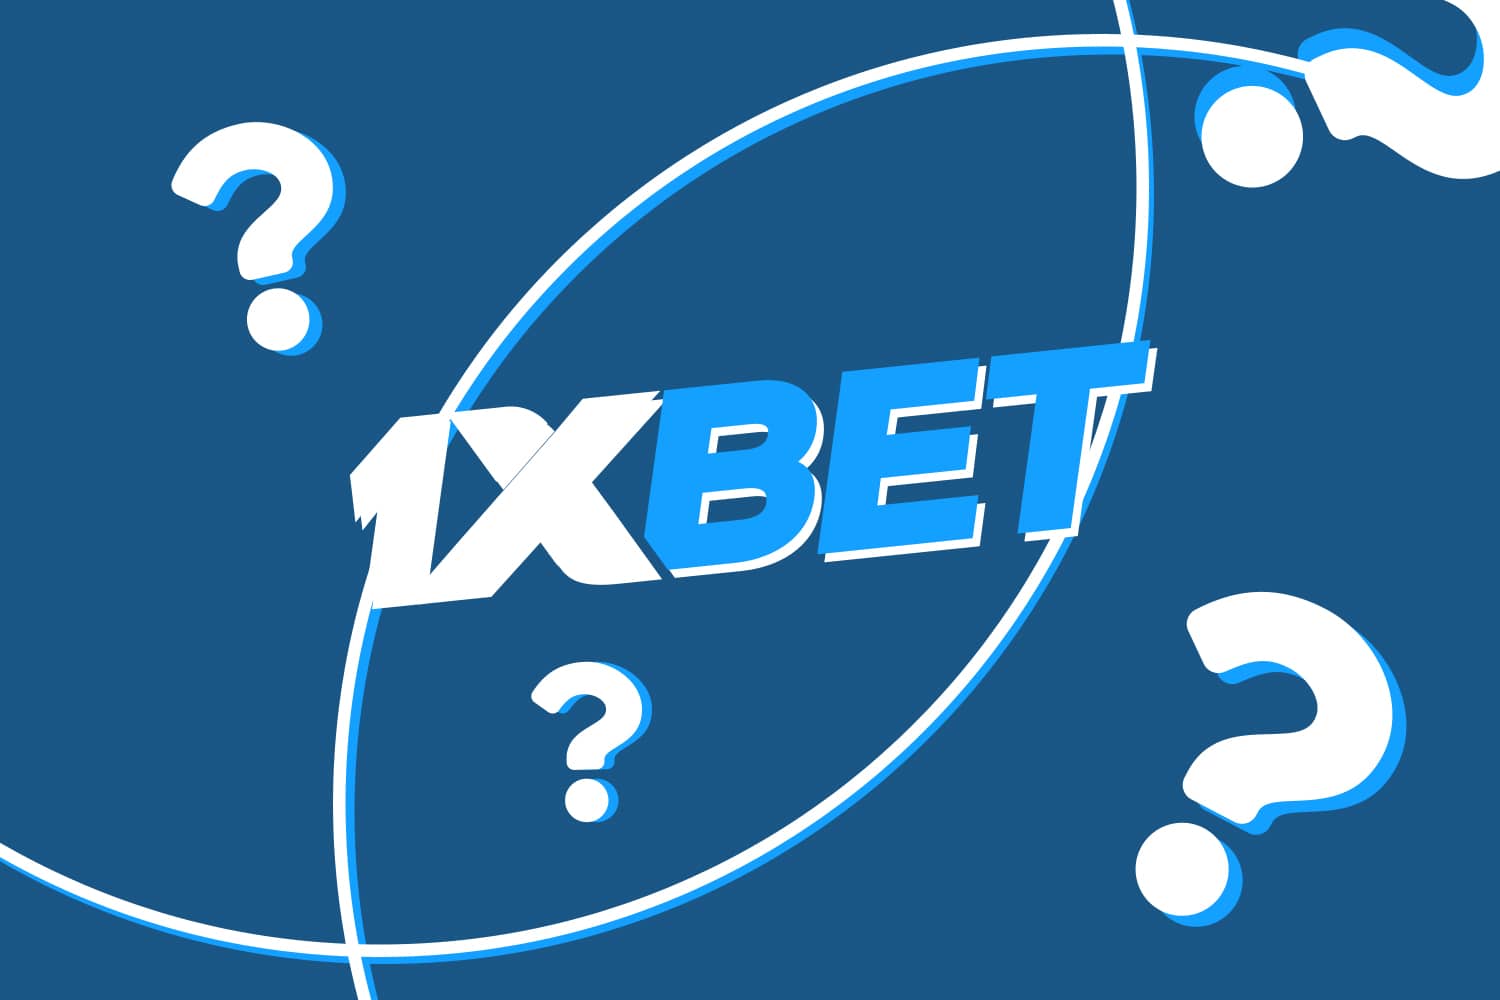 performance équipe 1xbet signification